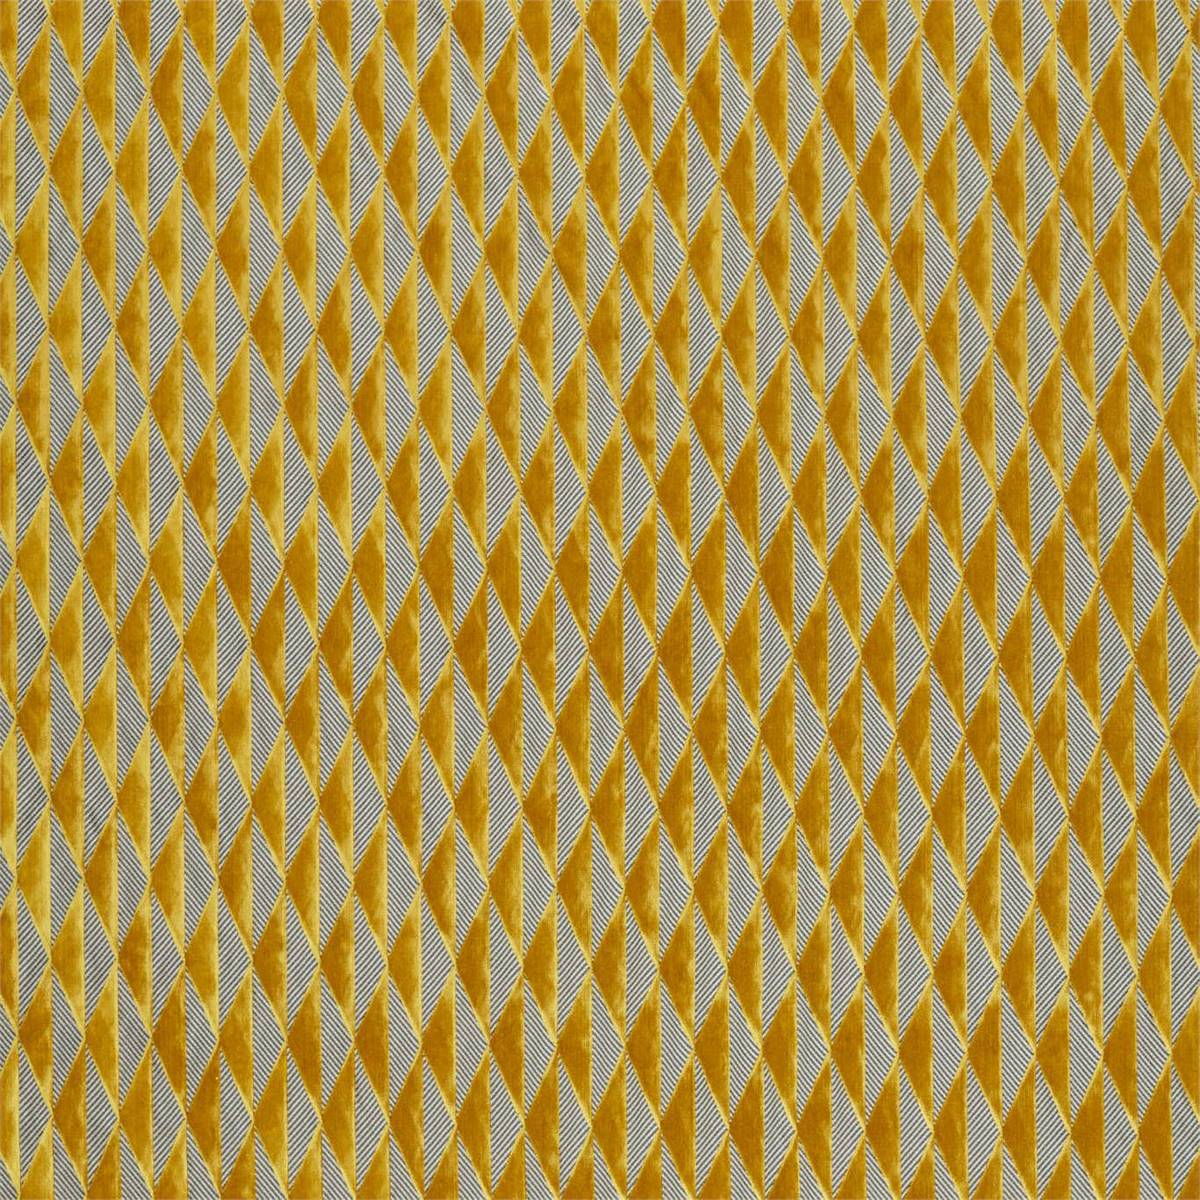 Irradiant Gold Fabric by Harlequin